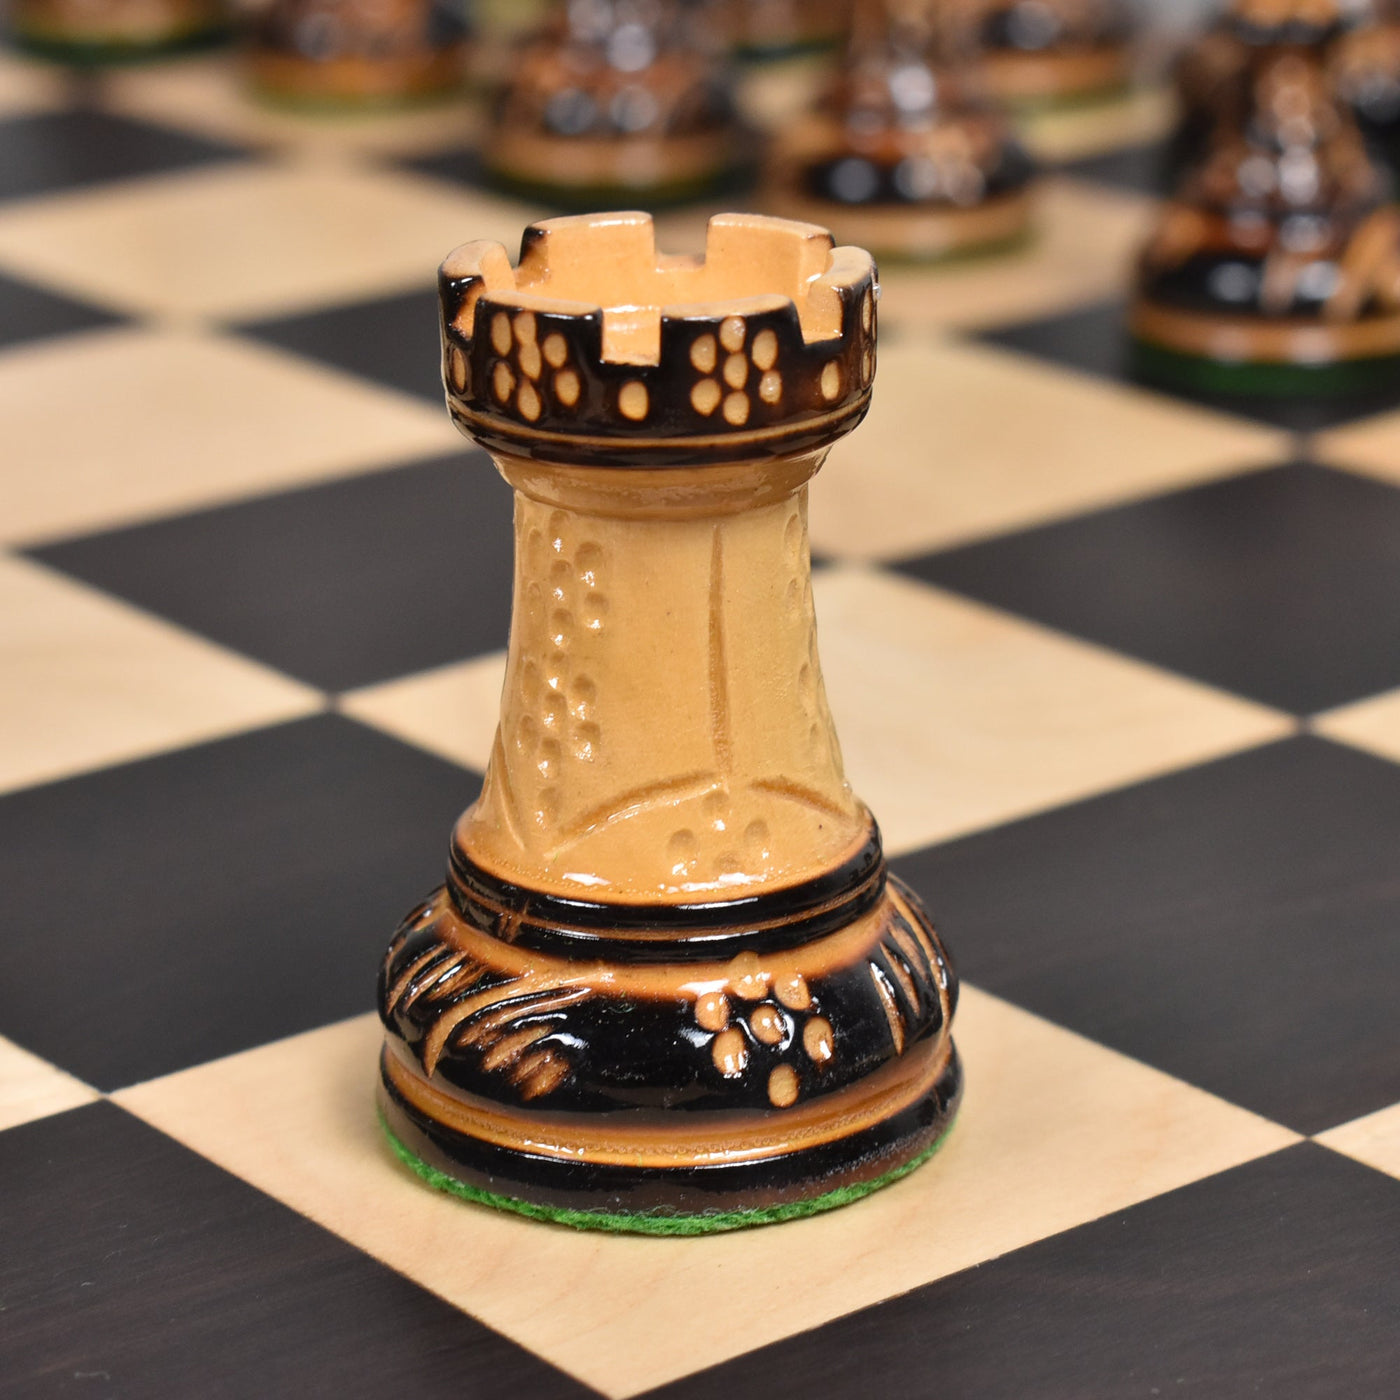 1970s' Dubrovnik Chess Pieces Only Set | Dubrovnik Chess | Luxury Chess Pieces